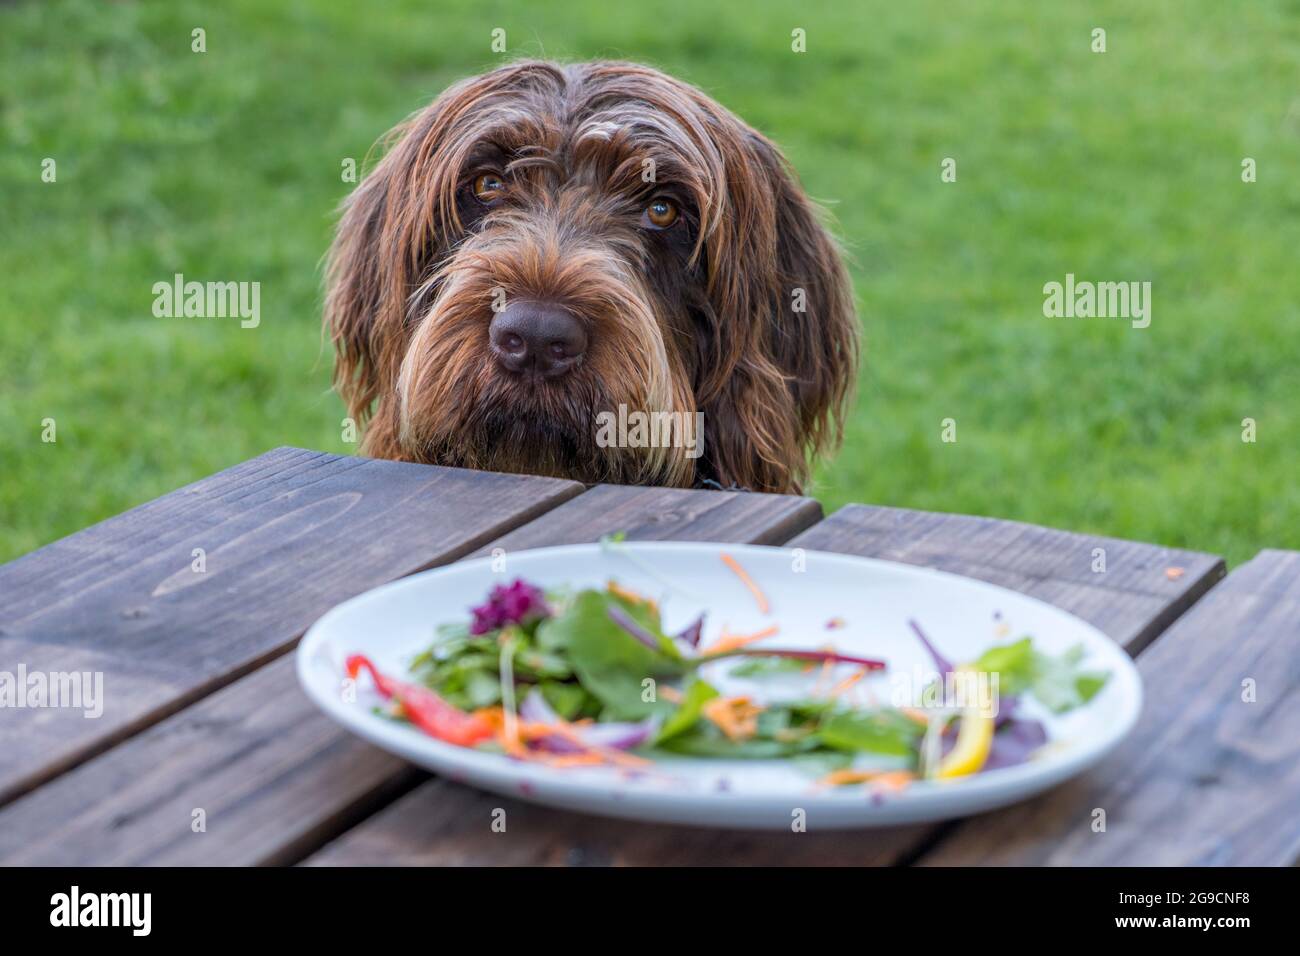 A Griffon Korthals dog with a pleading or guilty look. A plate with the remains of a salad and no meat in the foreground. Stock Photo